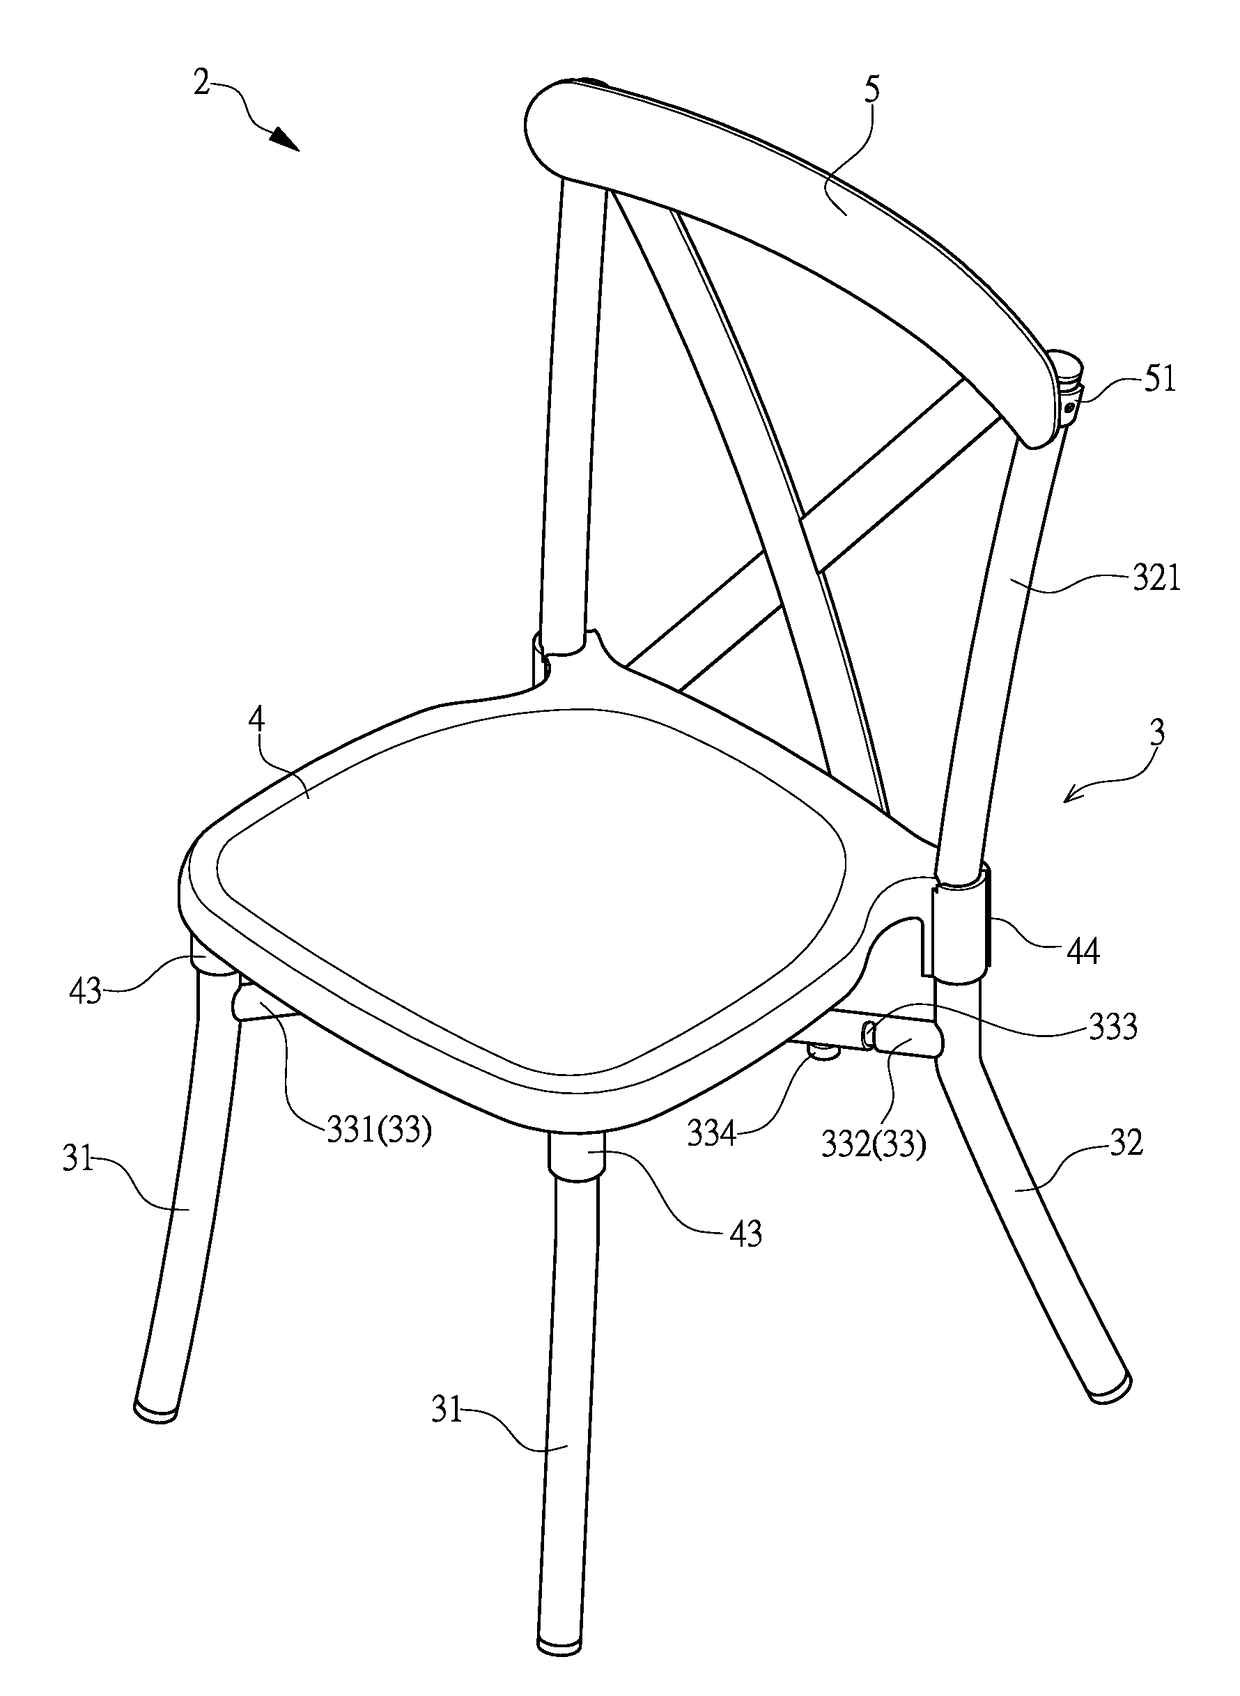 Structure of reception chair